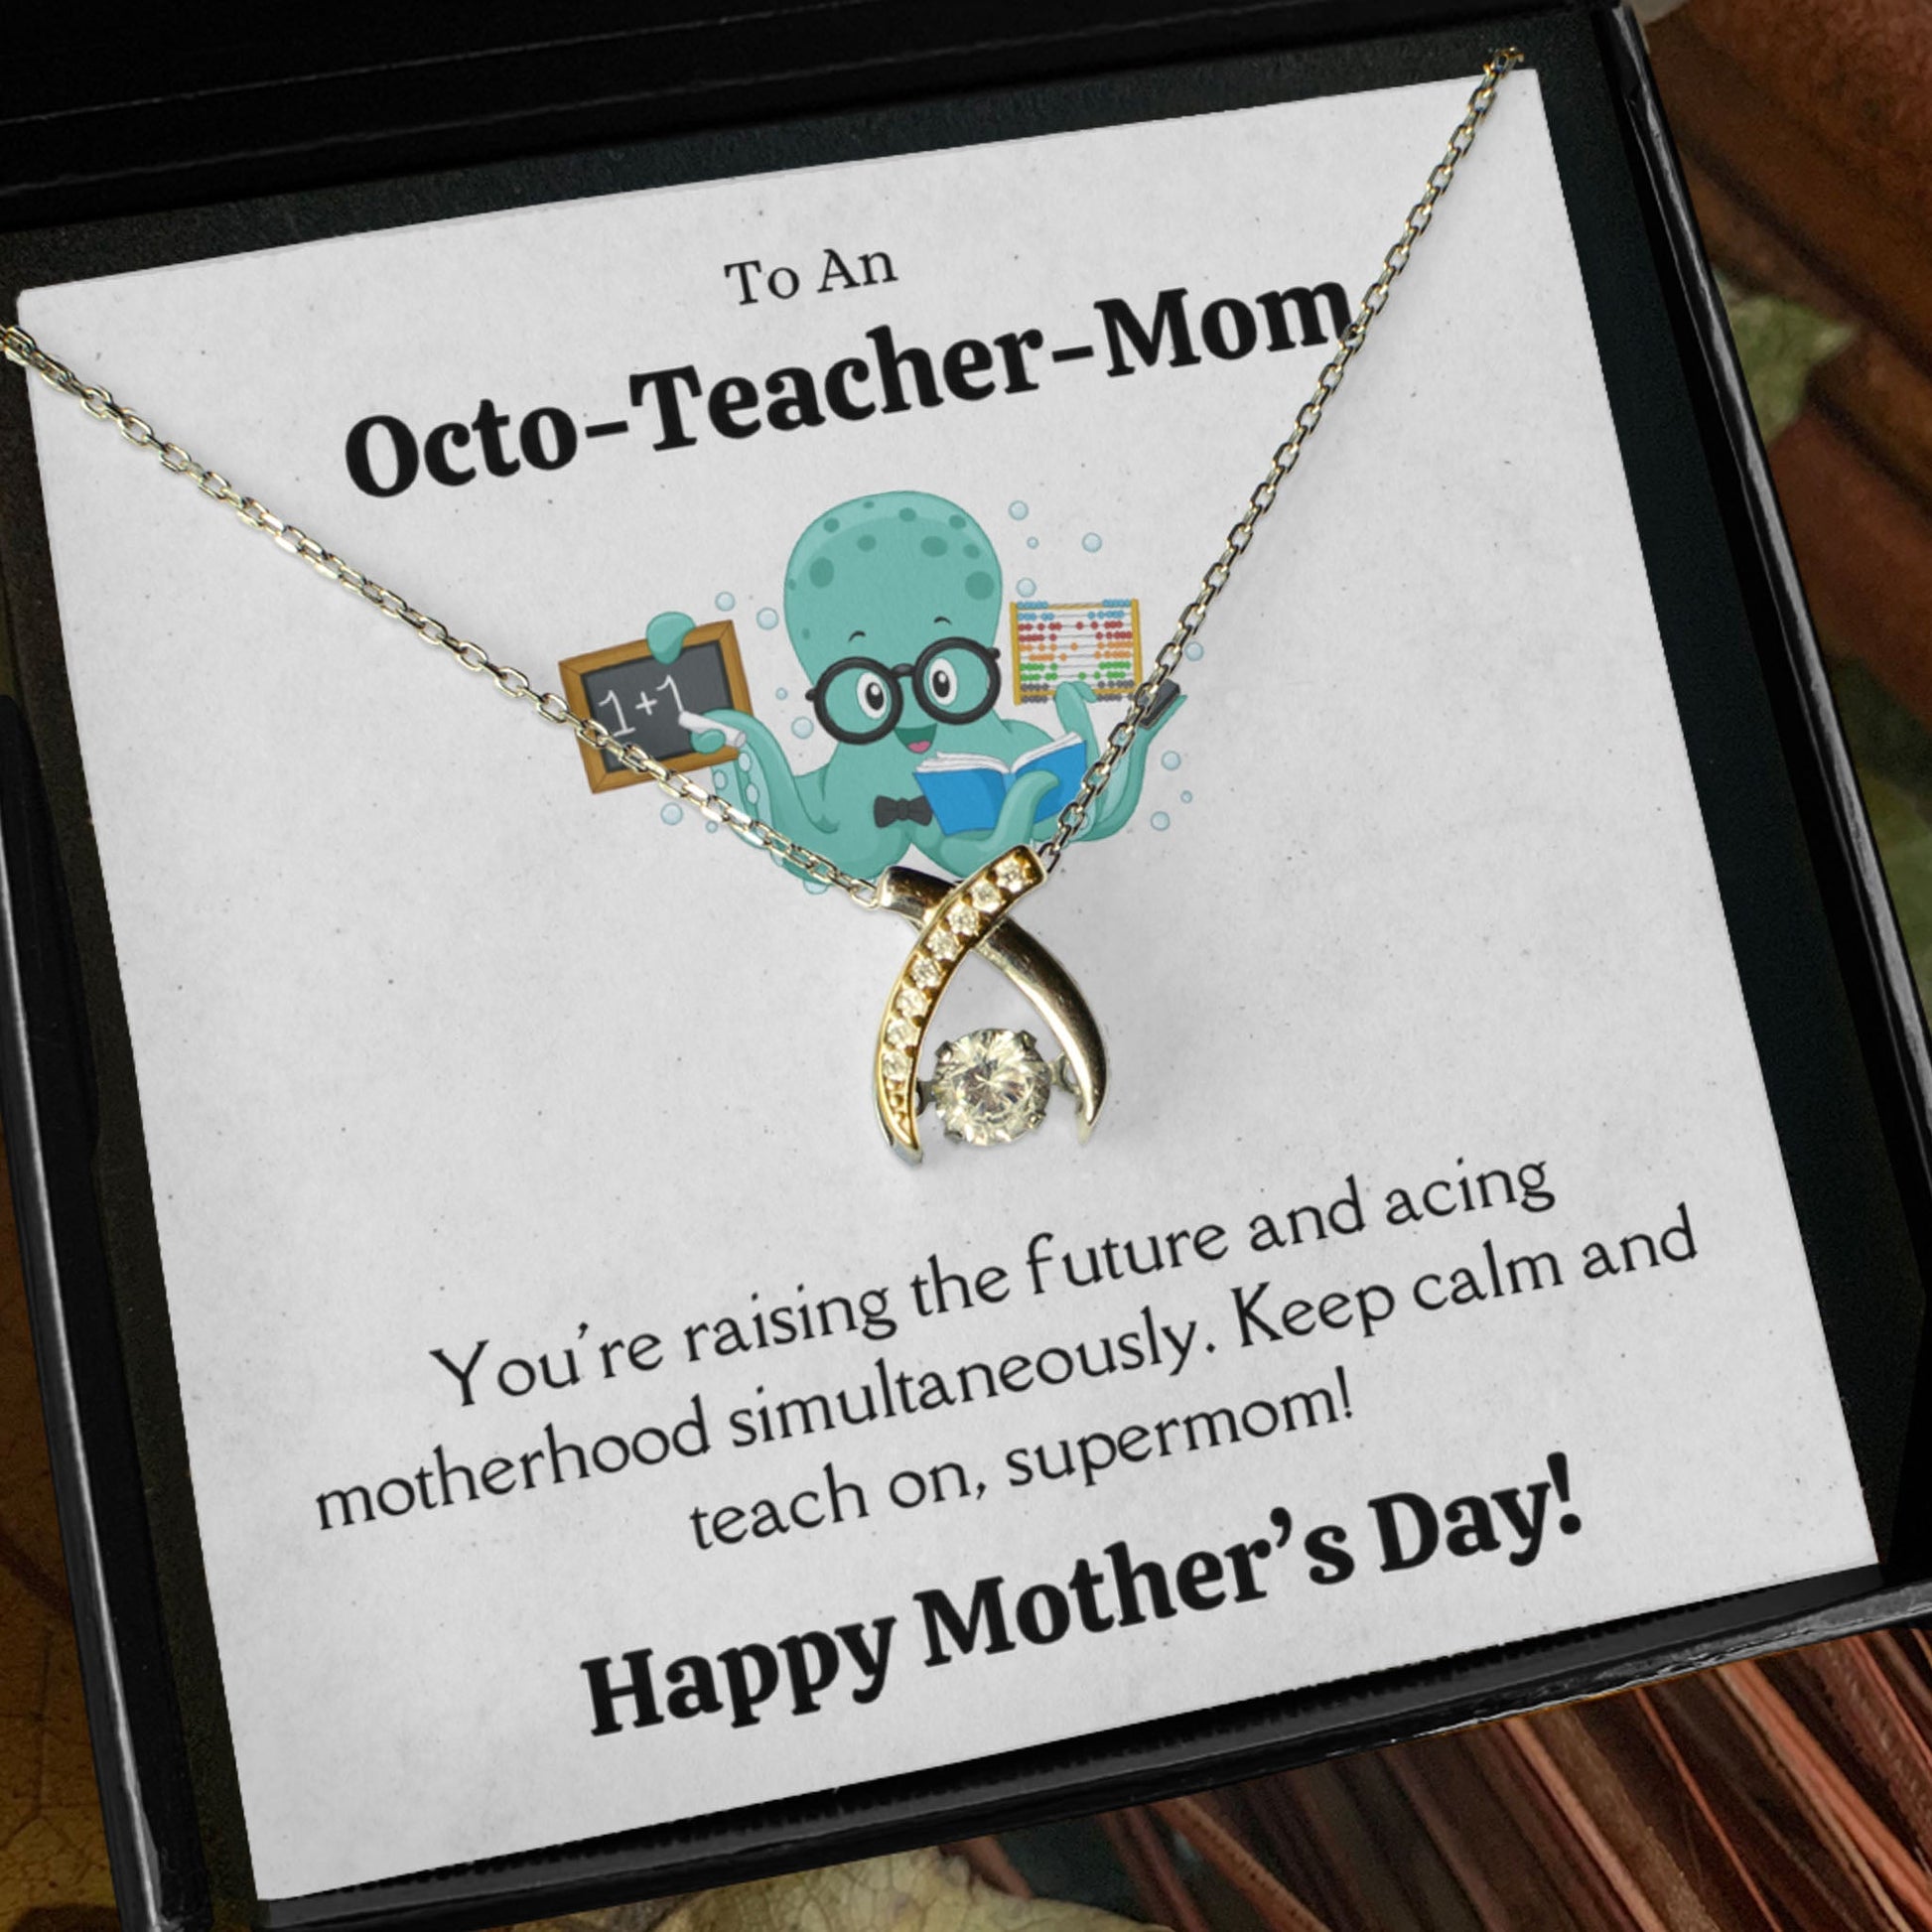 Personalized Necklaces + Message Cards - Wishbone Dancing Necklace -Octo-Teacher-Mom Card 